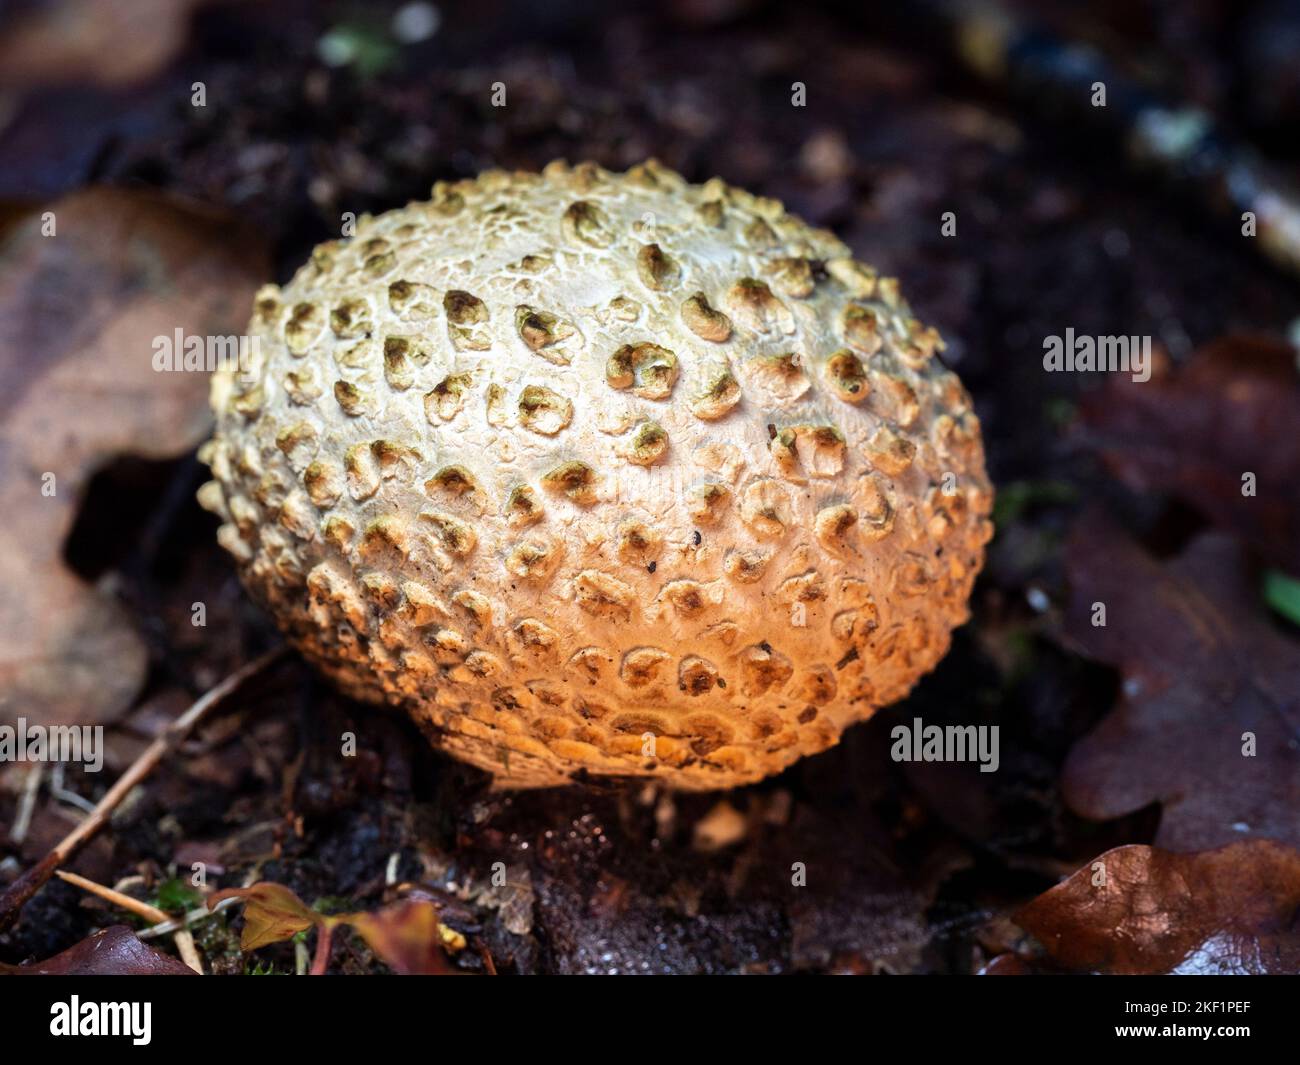 selective focus of an earth ball (Scleroderma citrinum) on a forest floor with blurred background Stock Photo